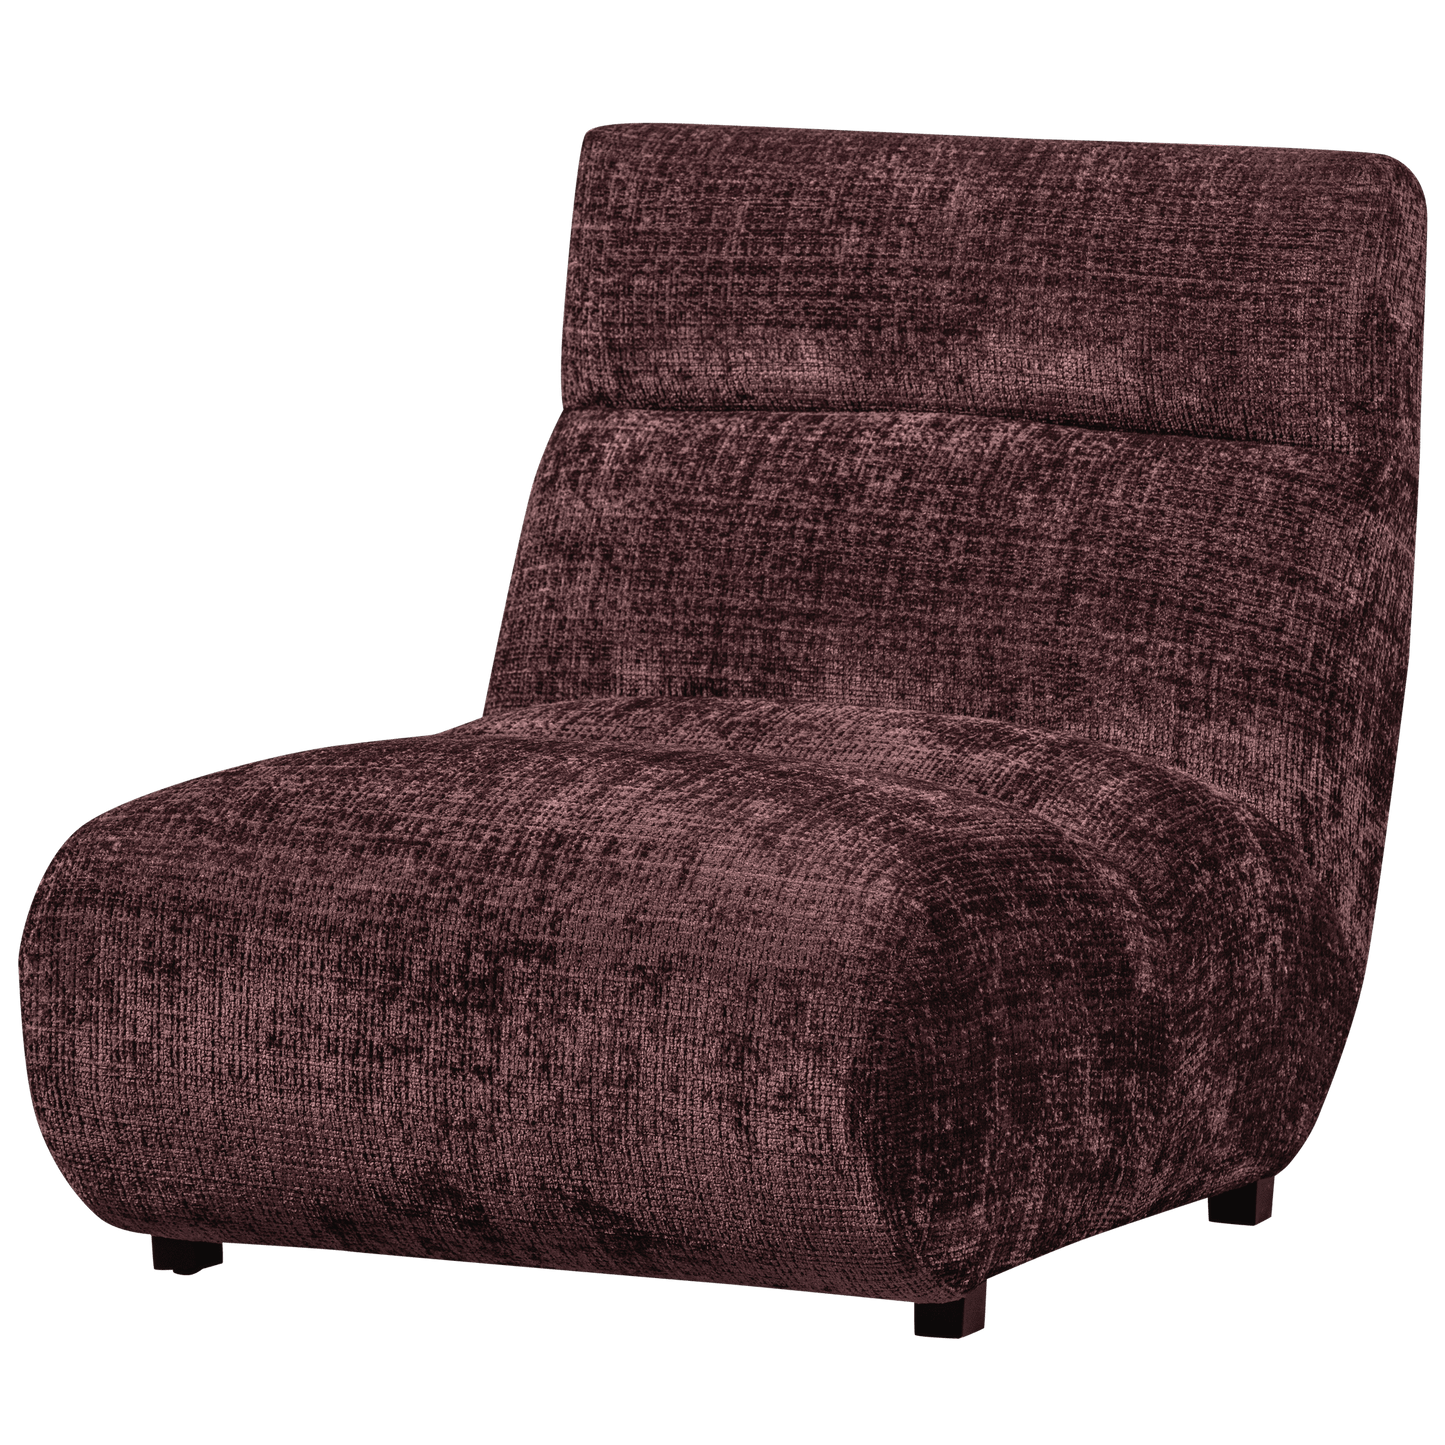 BePureHome Observe fauteuil aubergine